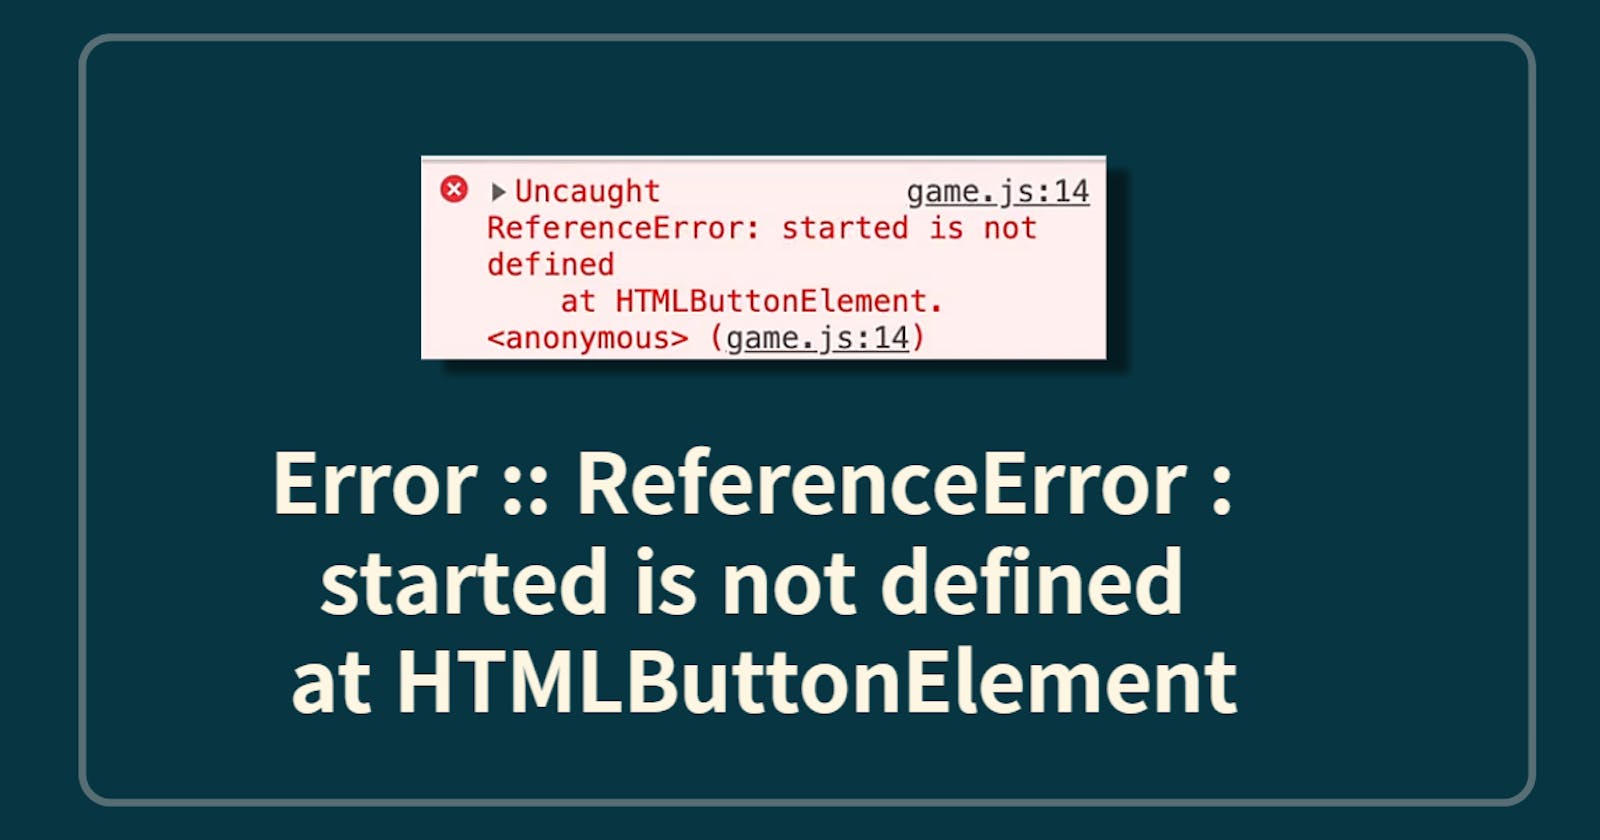 Error :: ReferenceError : started is not defined at HTMLButtonElement